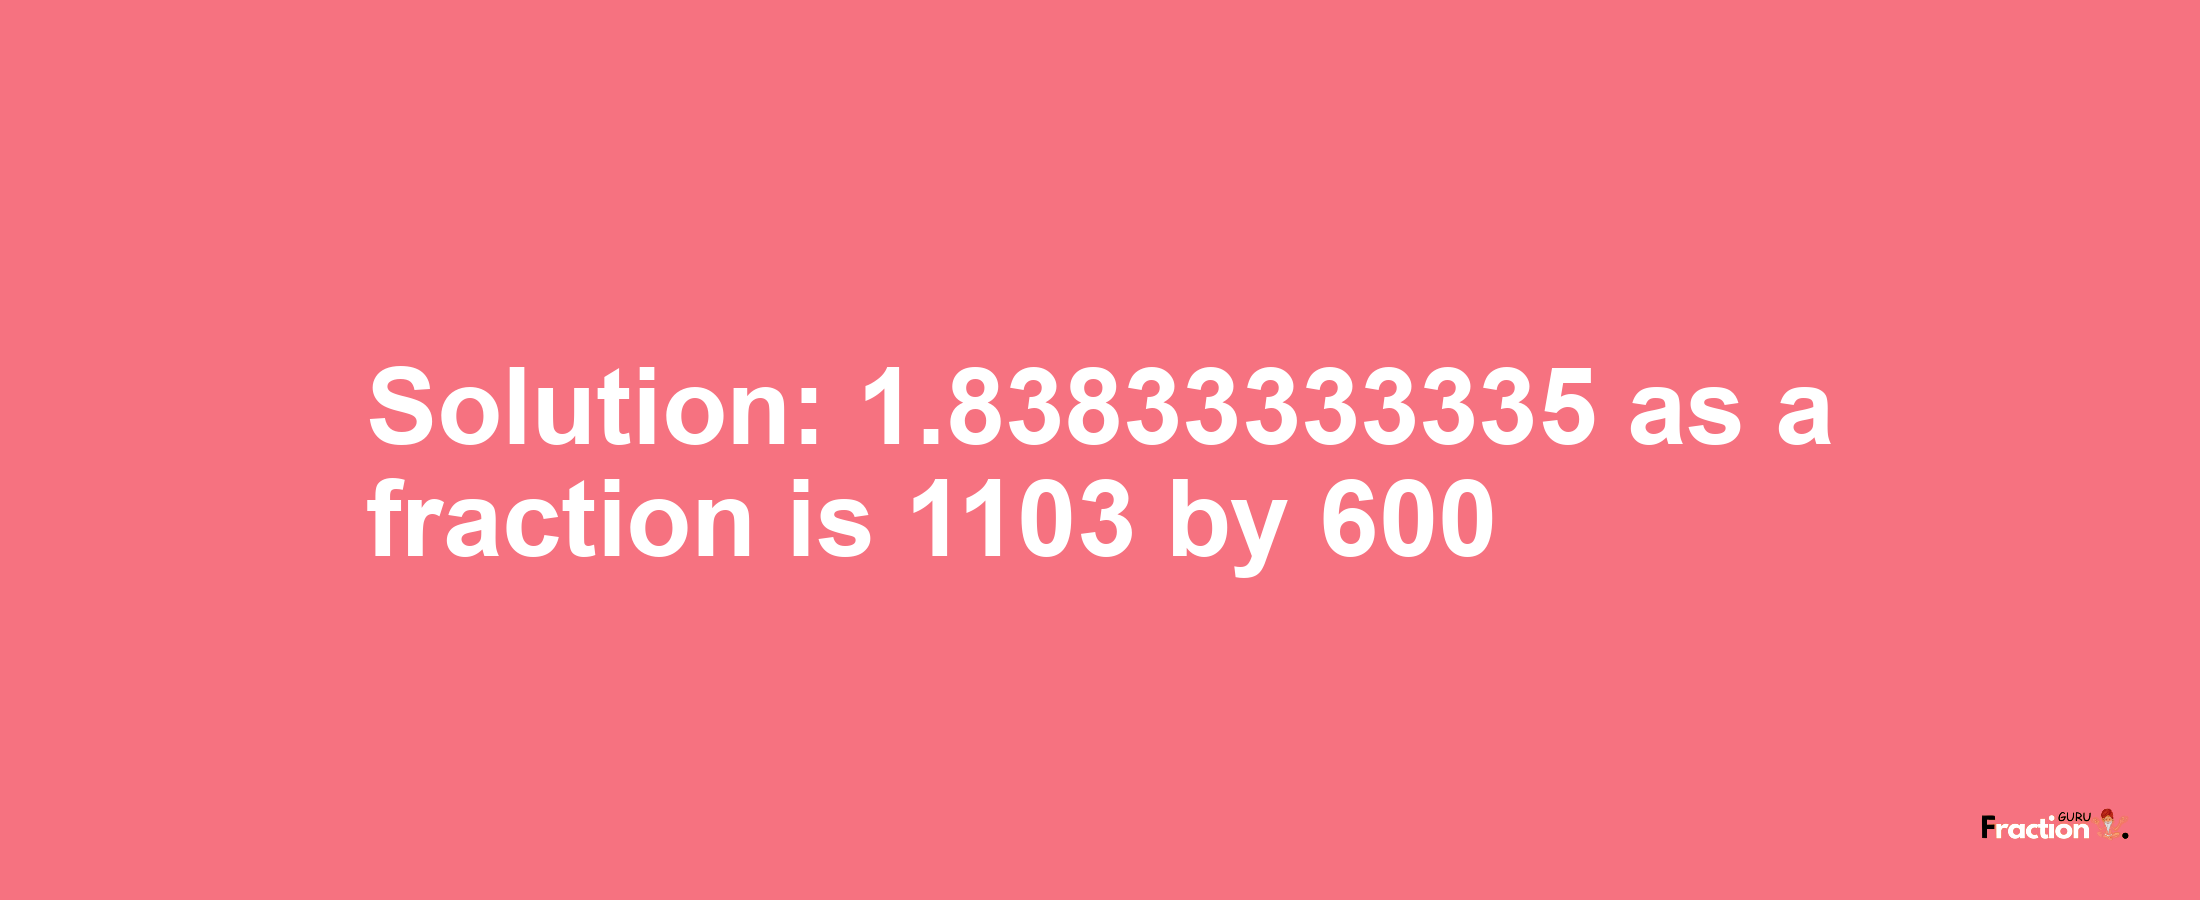 Solution:1.83833333335 as a fraction is 1103/600